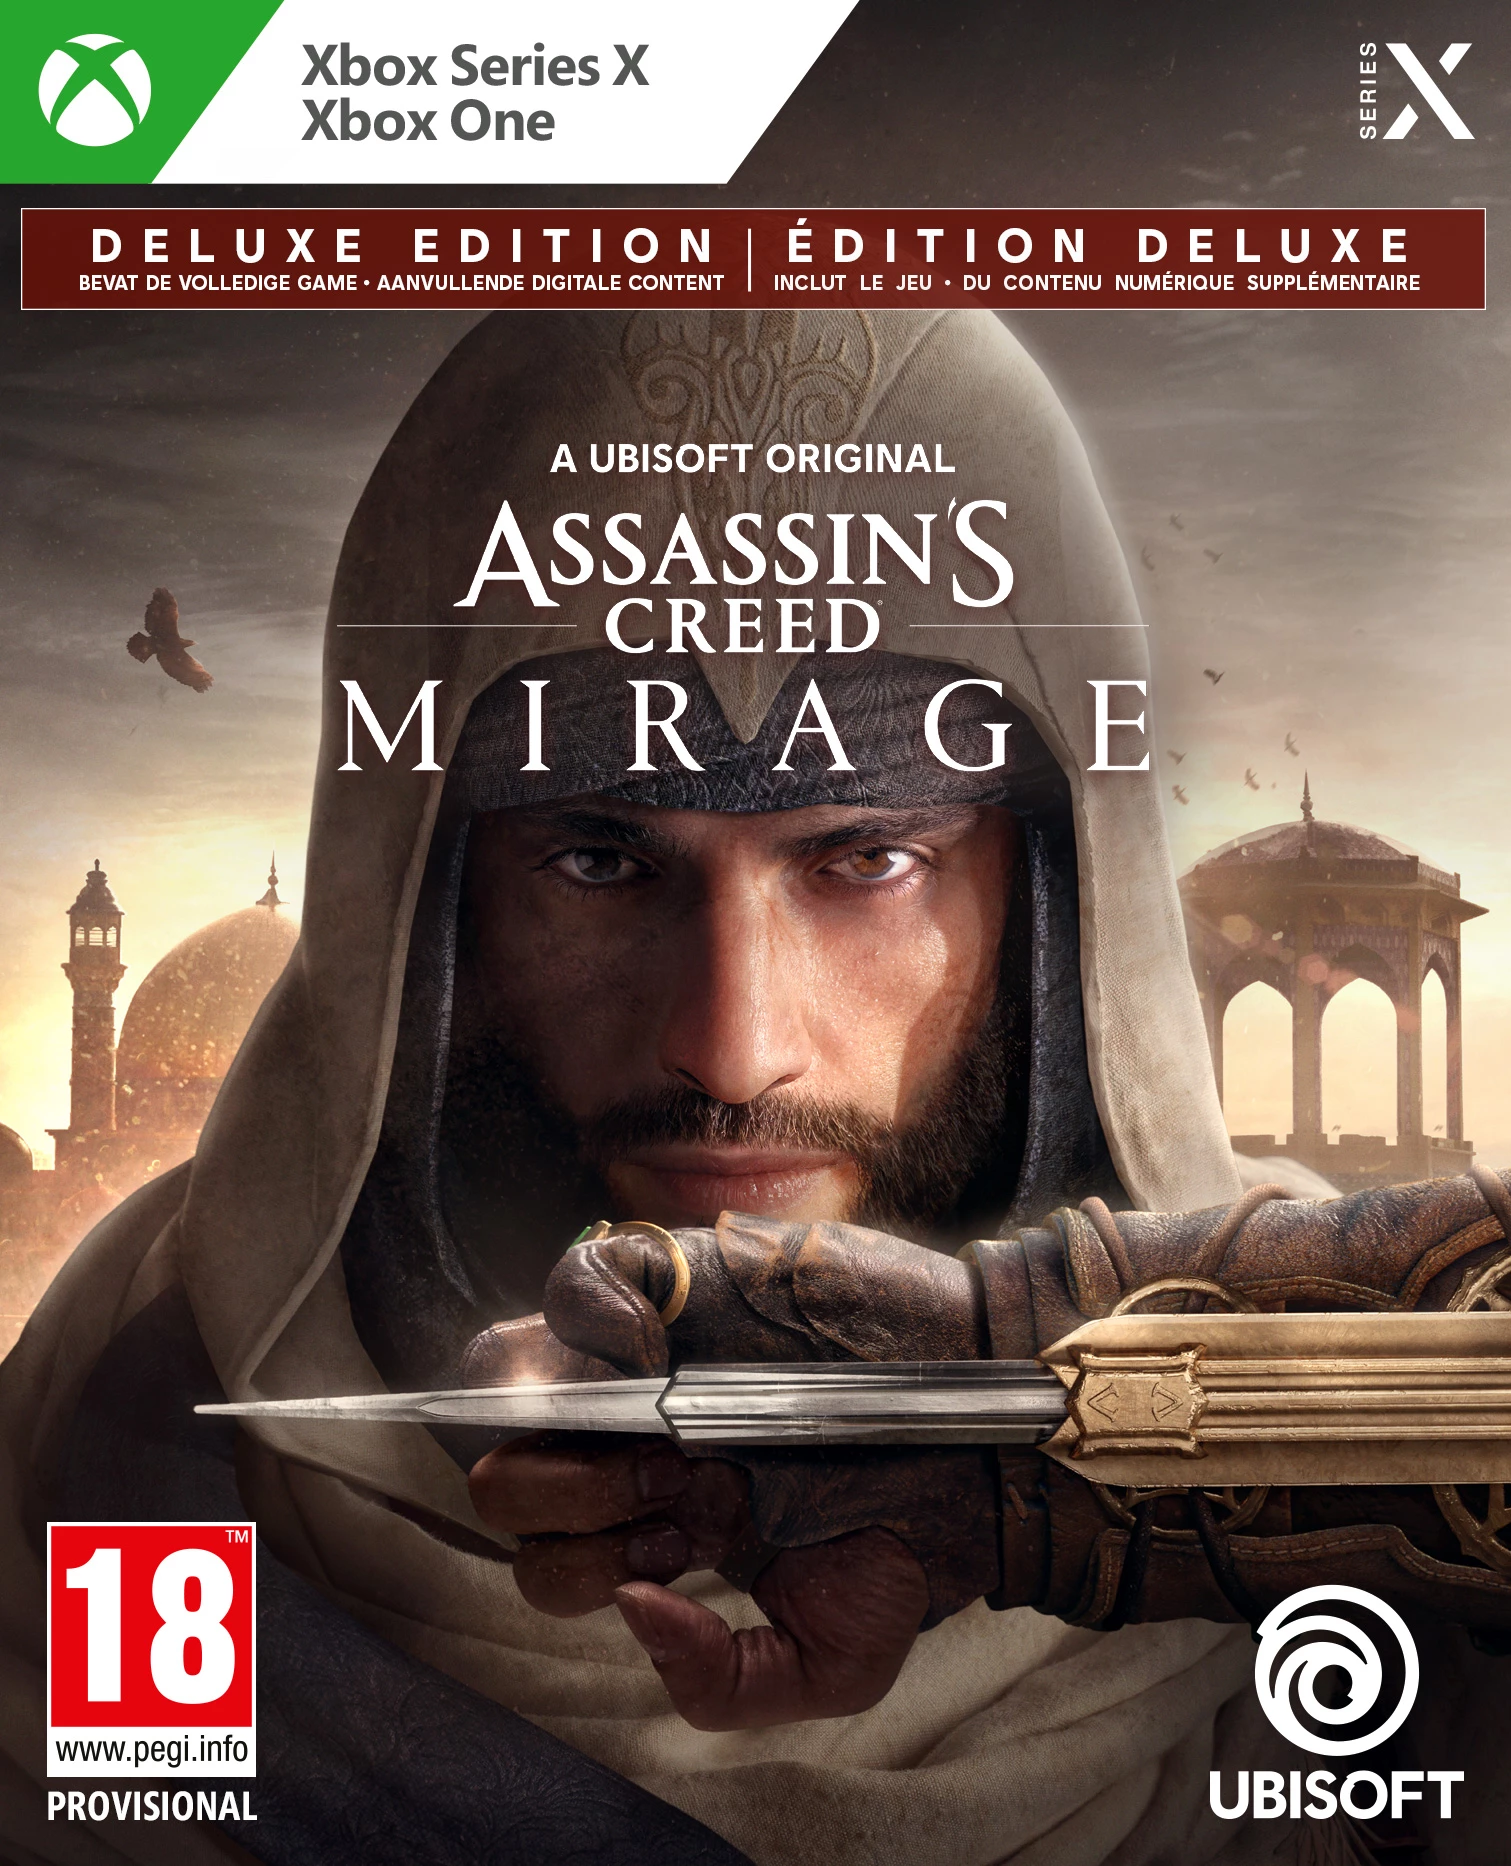 Assassins Creed: Mirage - Deluxe Edition (Xbox One), Ubisoft